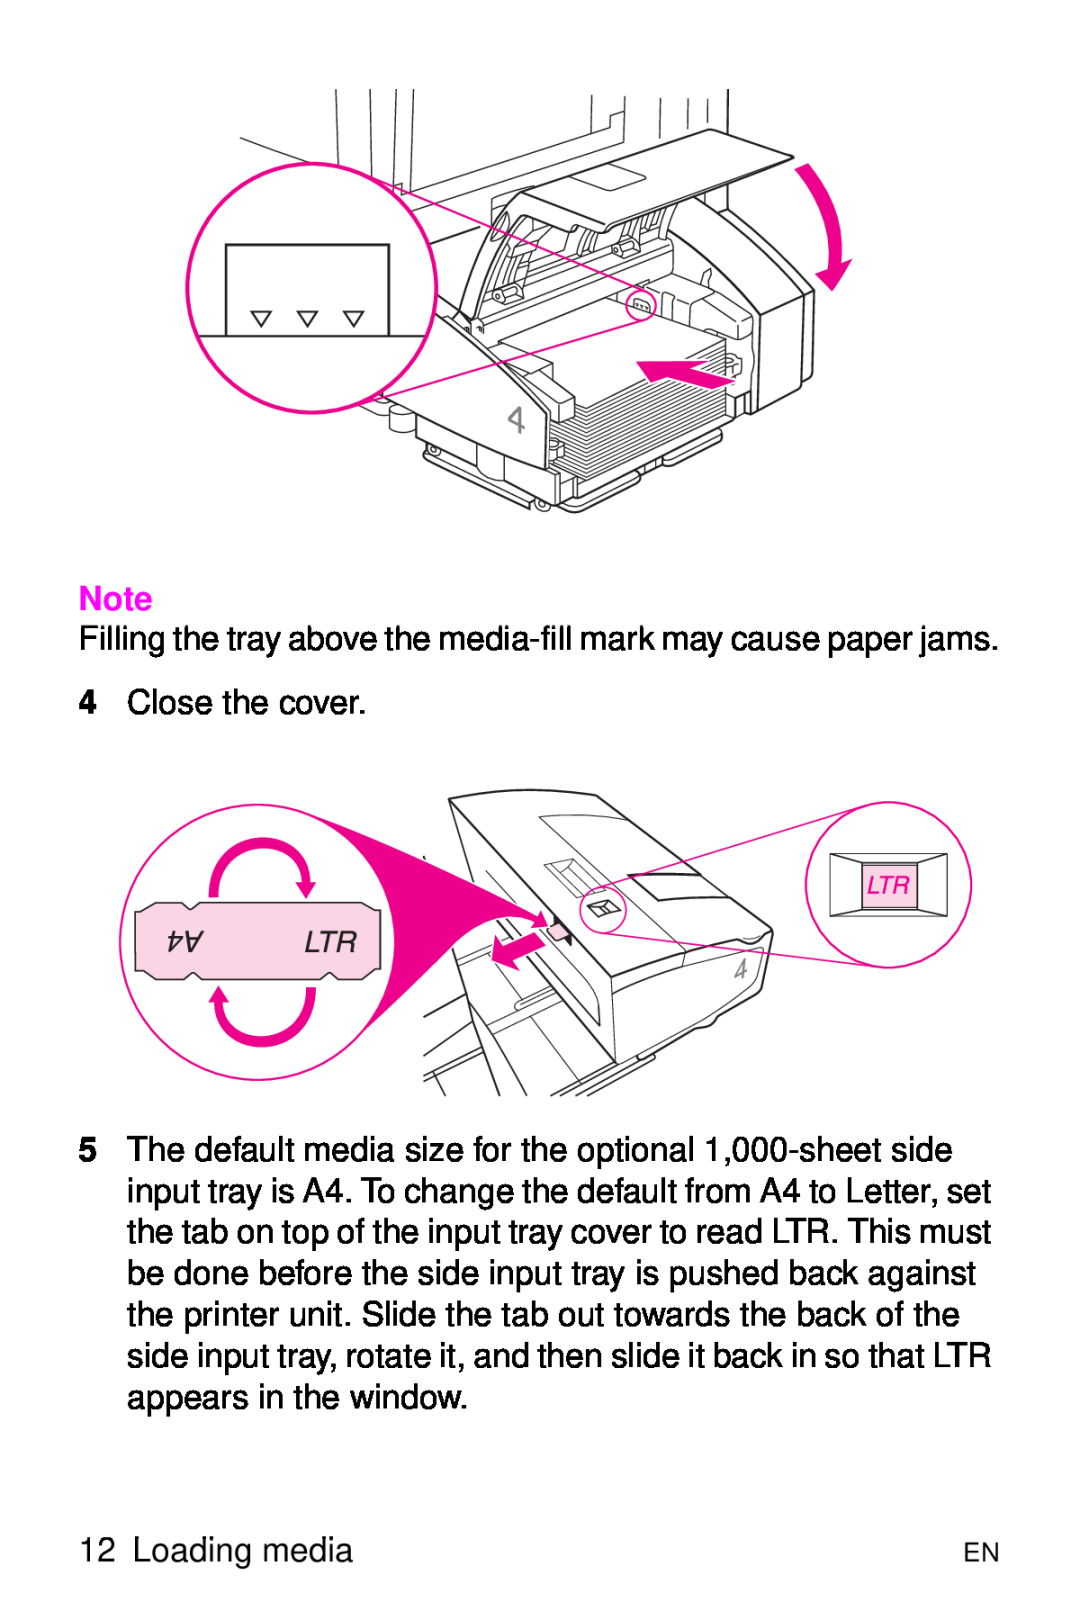 HP 8000 s manual Filling the tray above the media-fill mark may cause paper jams 